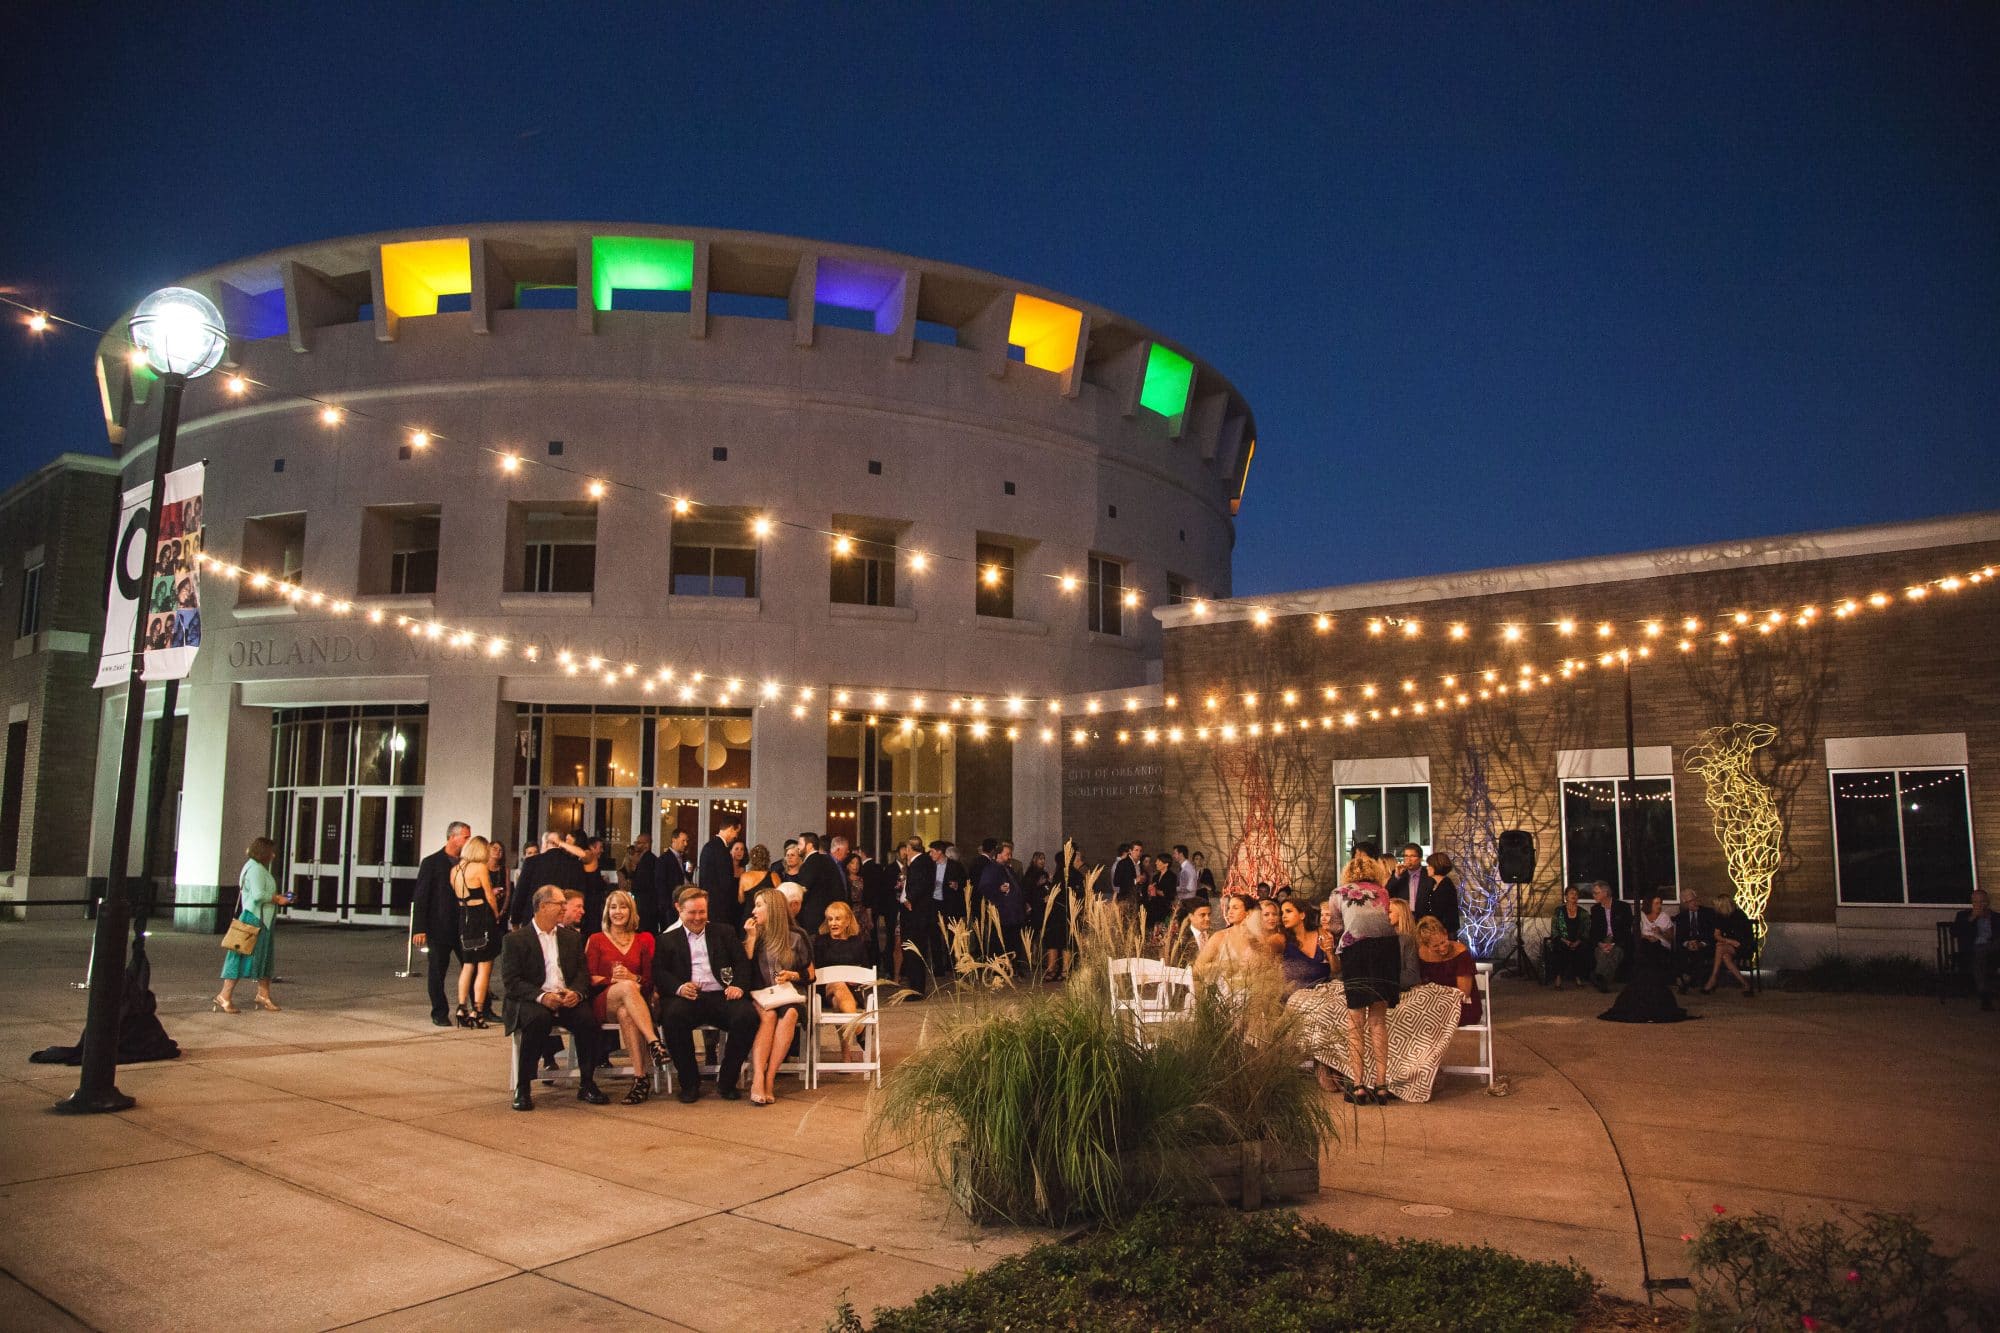 Orlando Museum of Art - outdoor ceremony on patio strung with market lighting